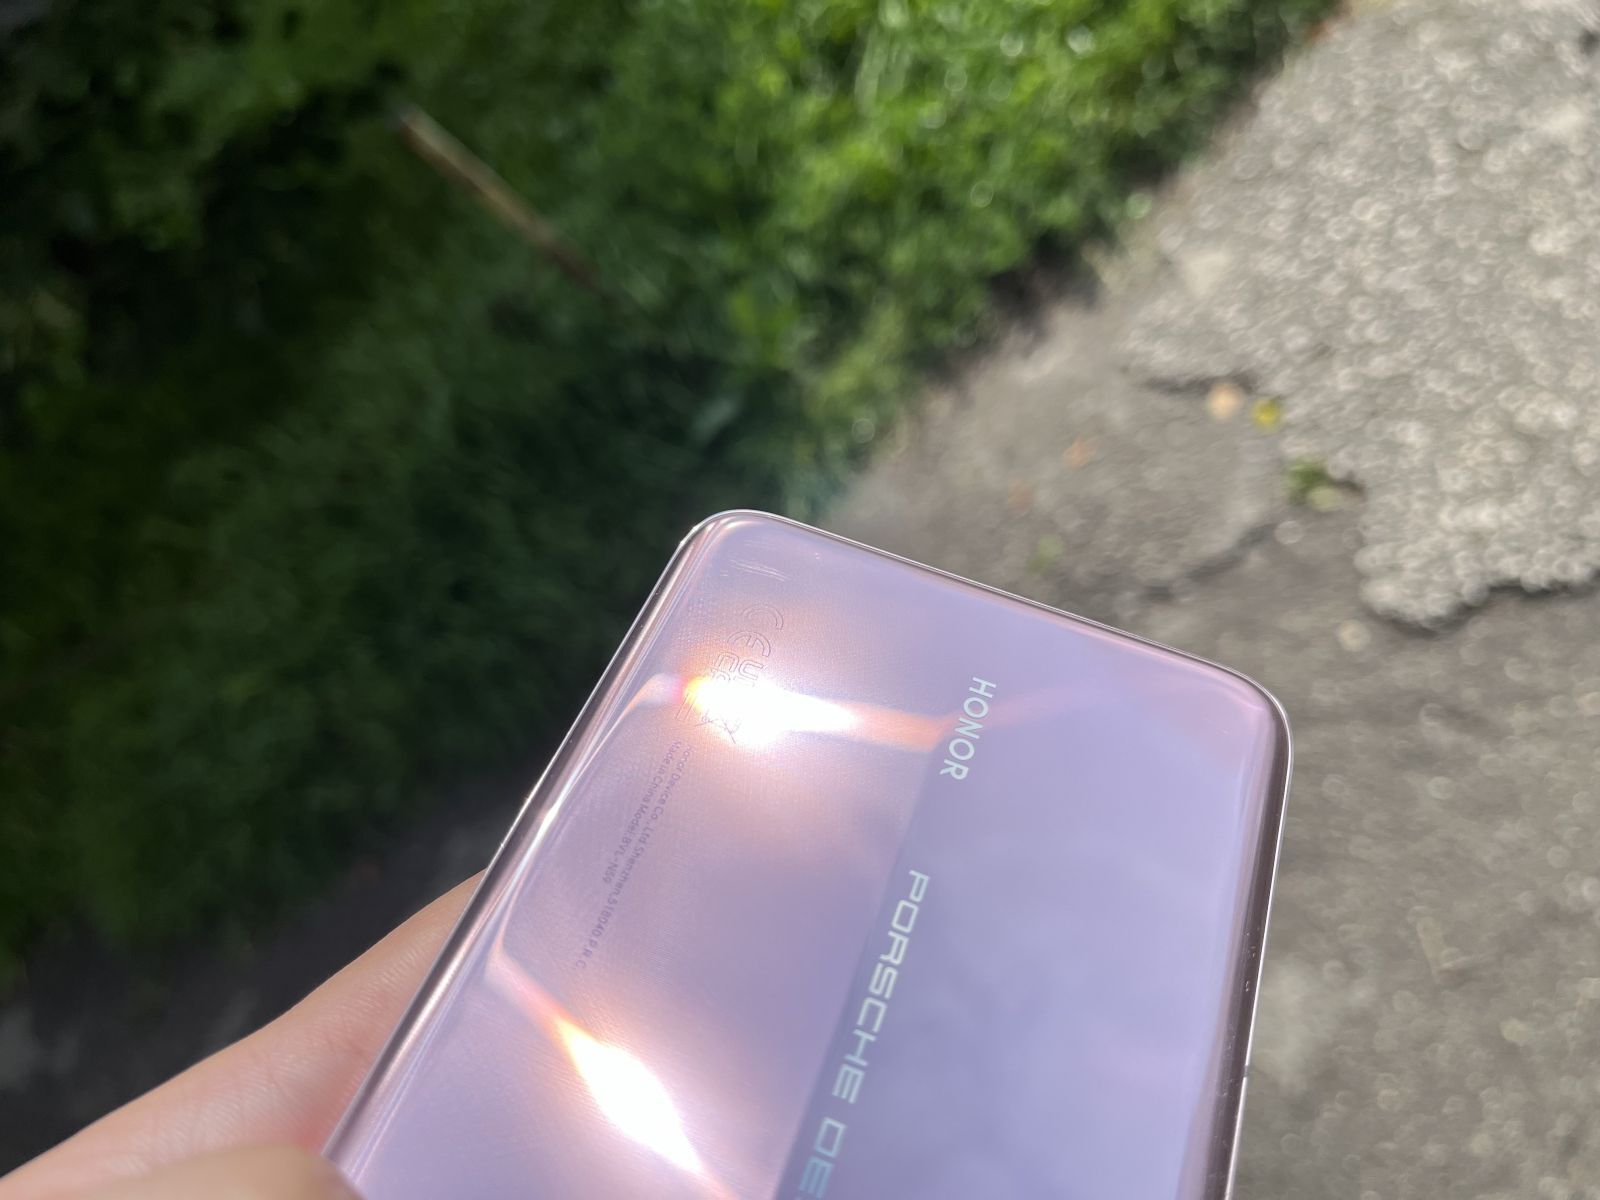 You can see the scratch in the upper left corner - The Next Big Thing? Phone with Unscratchable Display raises the bar for future iPhone and Galaxy